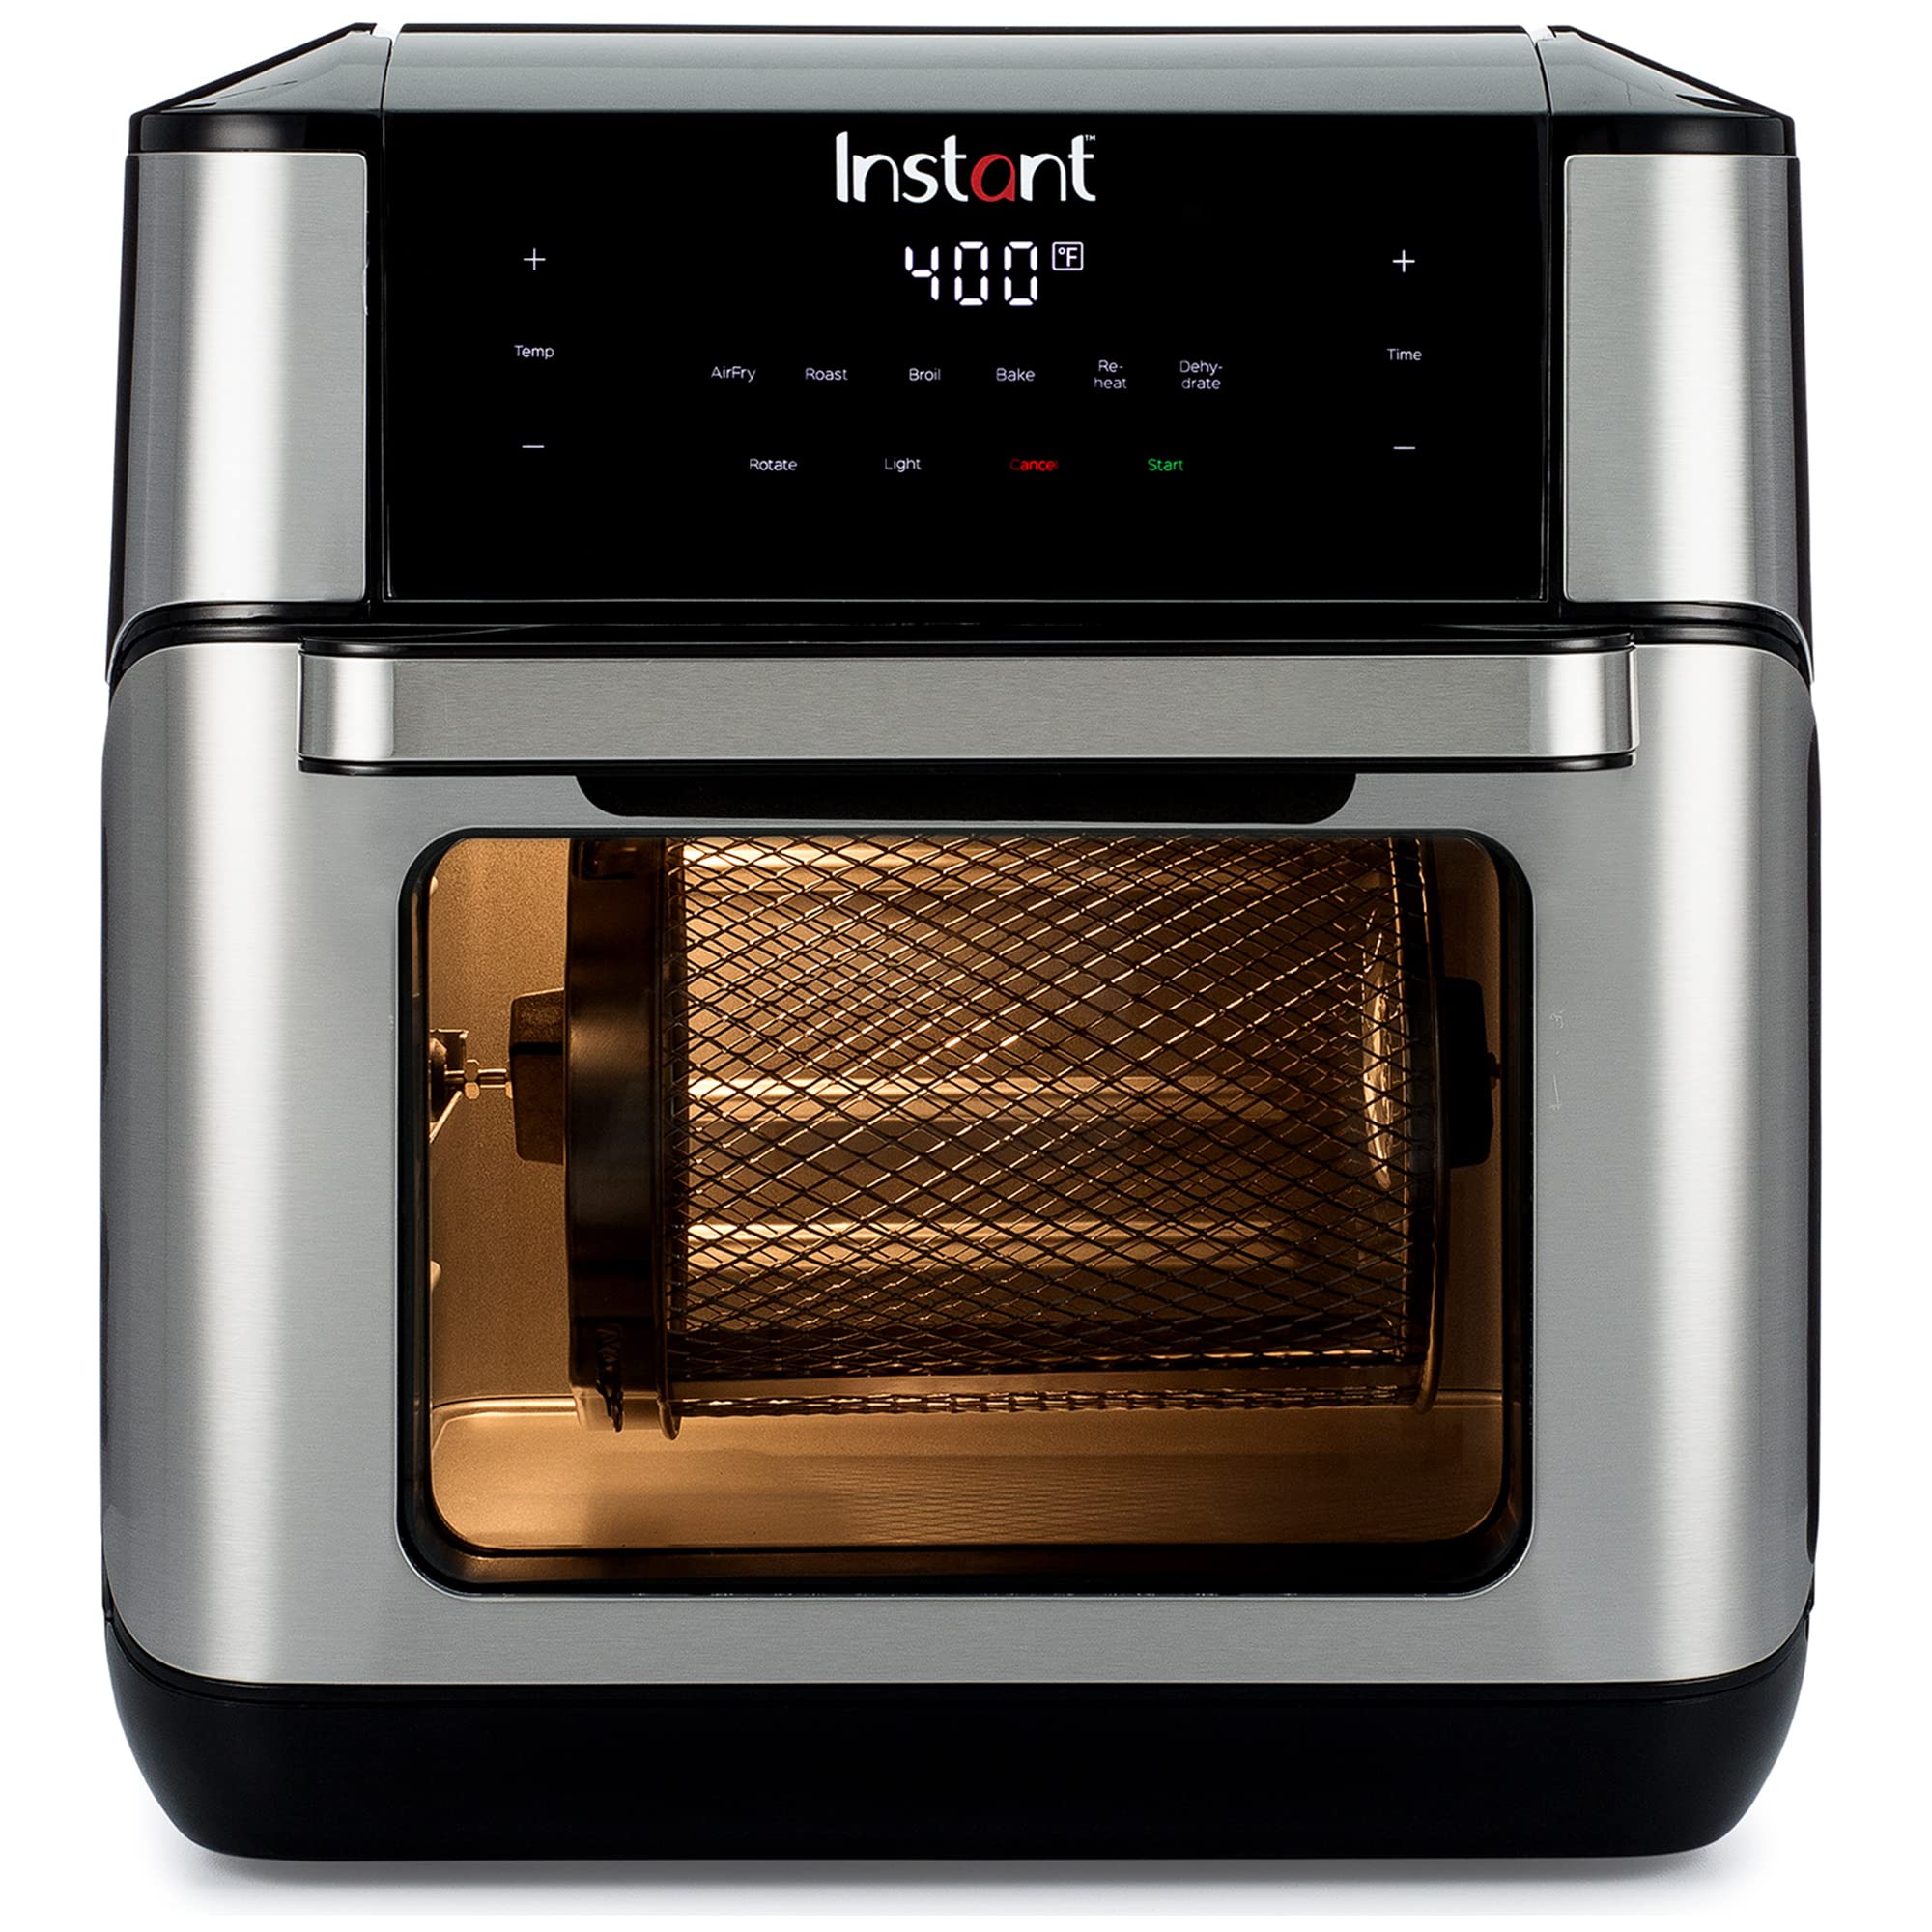 10-Quart Instant Pot 7-in-1 Air Fryer Oven (Stainless Steel) $76.49 + Free Shipping